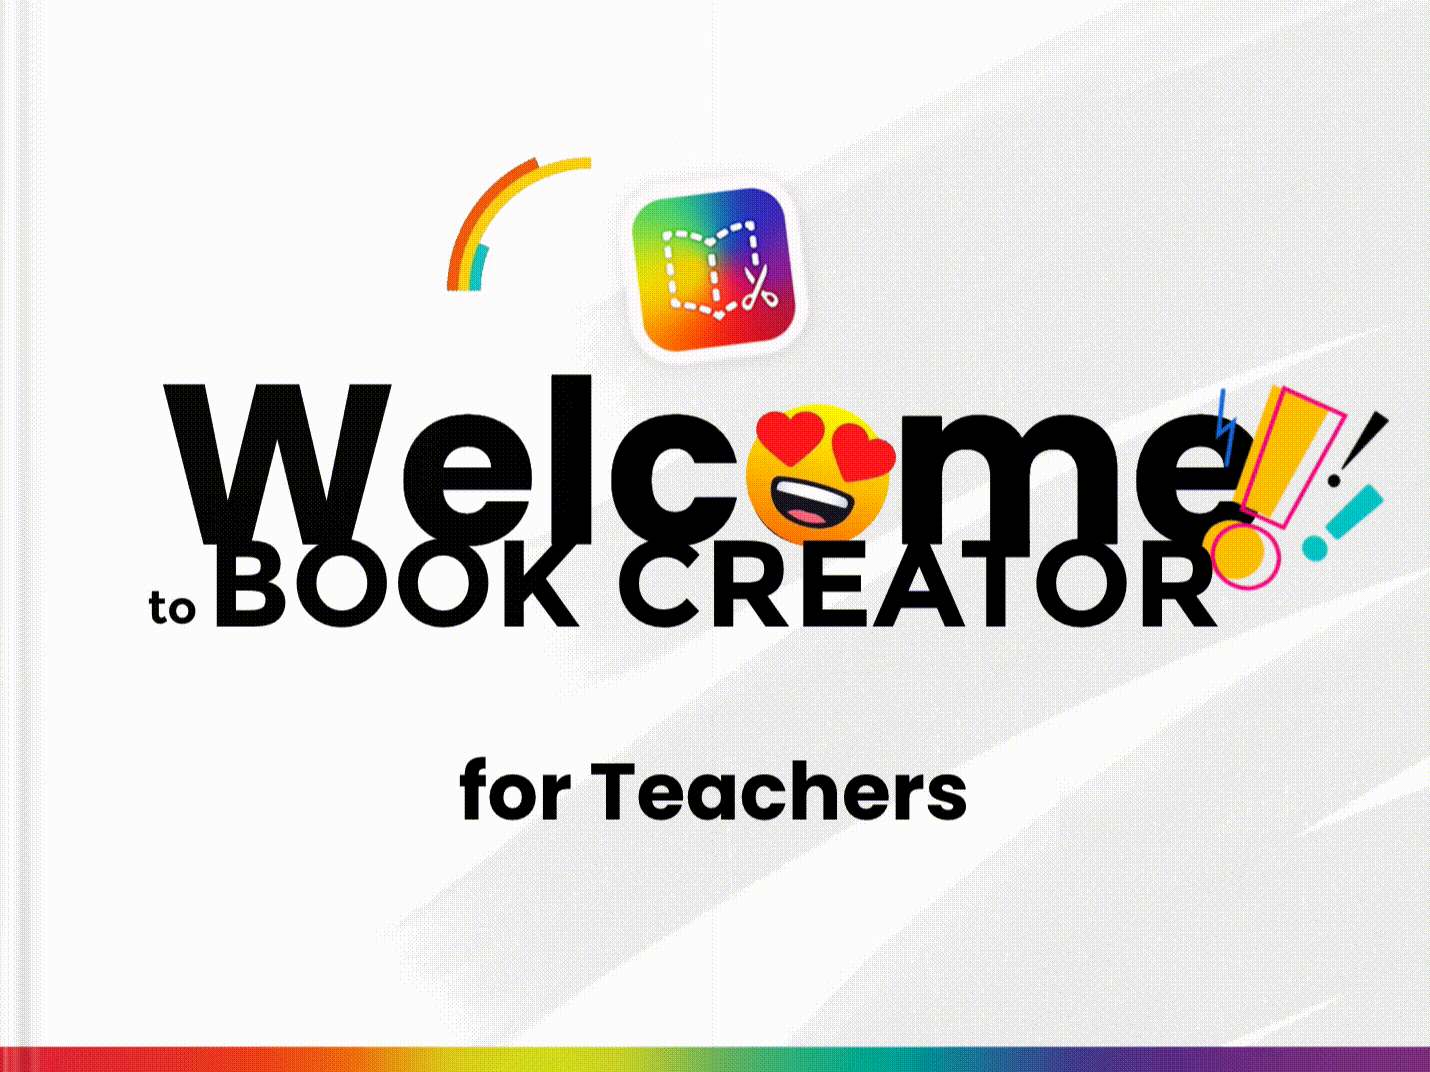 Welcome to Book Creator for Teachers